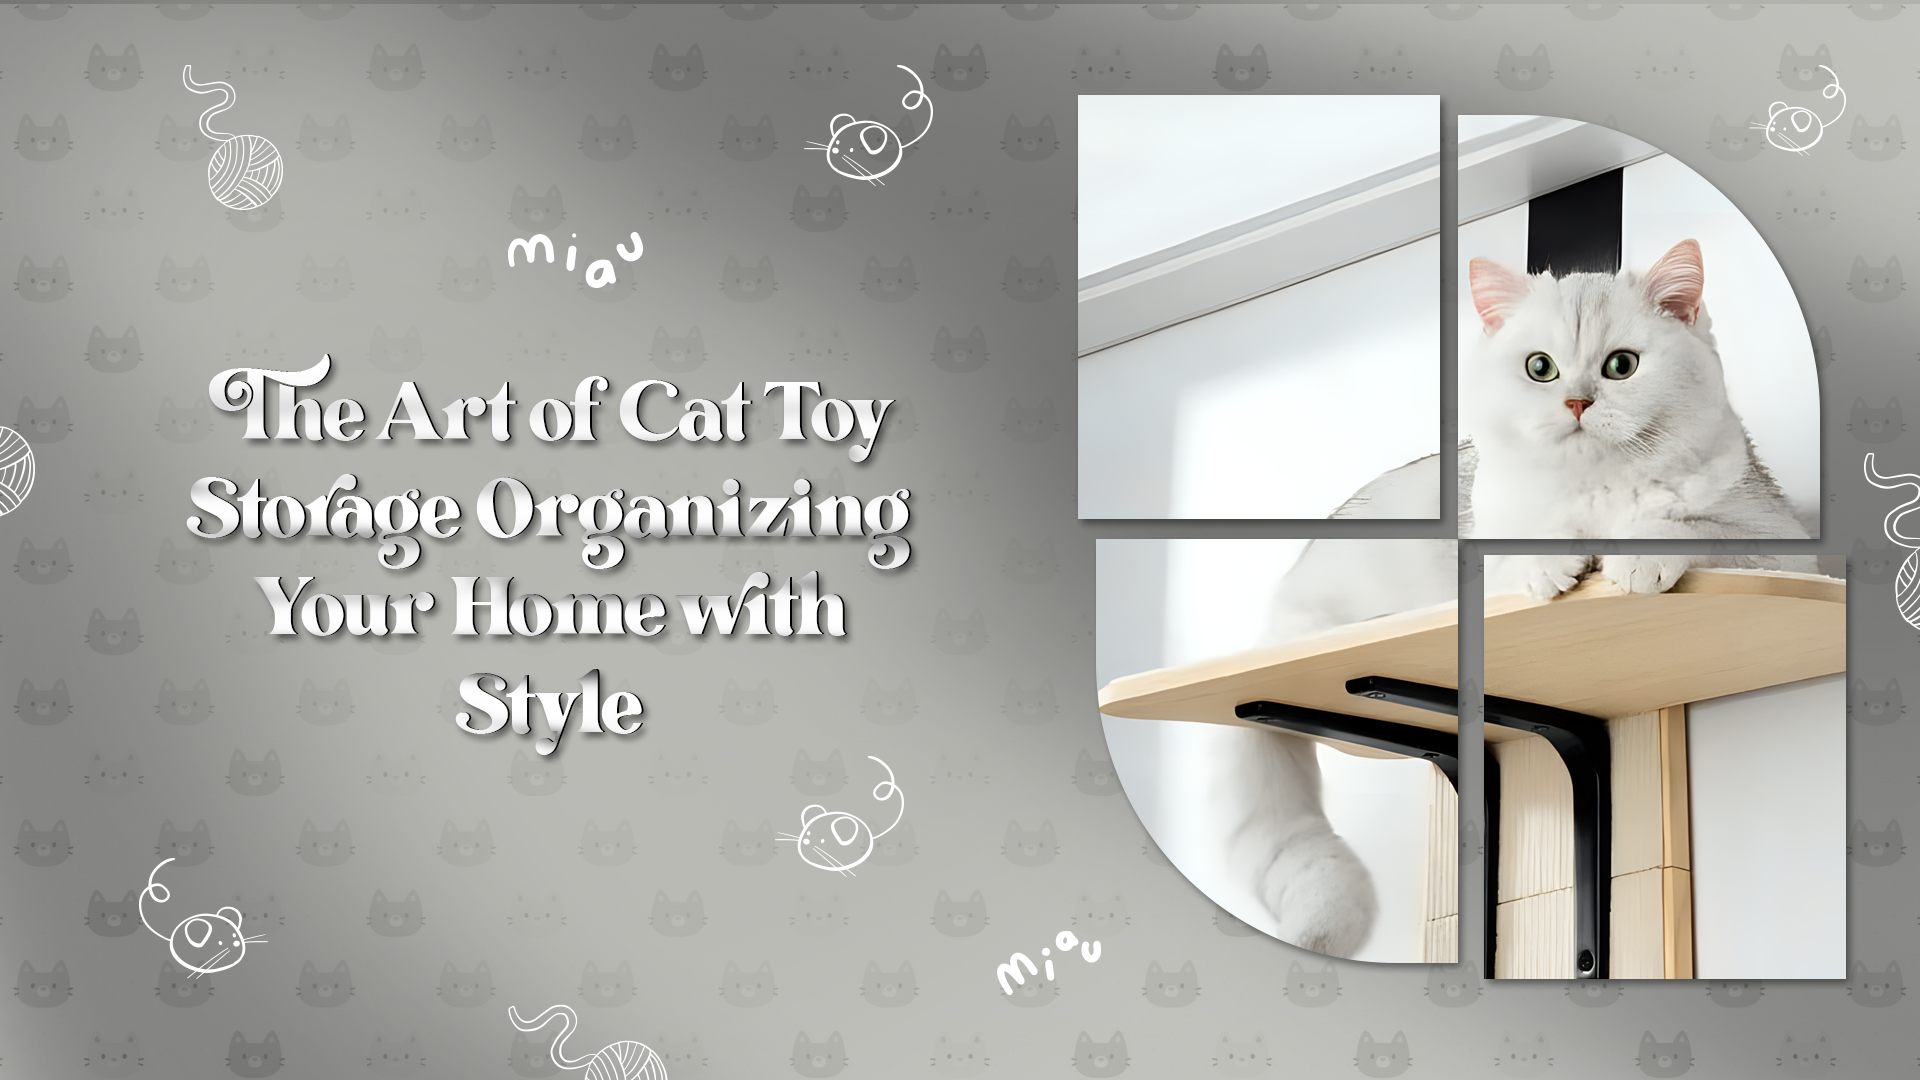 The Art of Cat Toy Storage: Organizing Your Home with Style